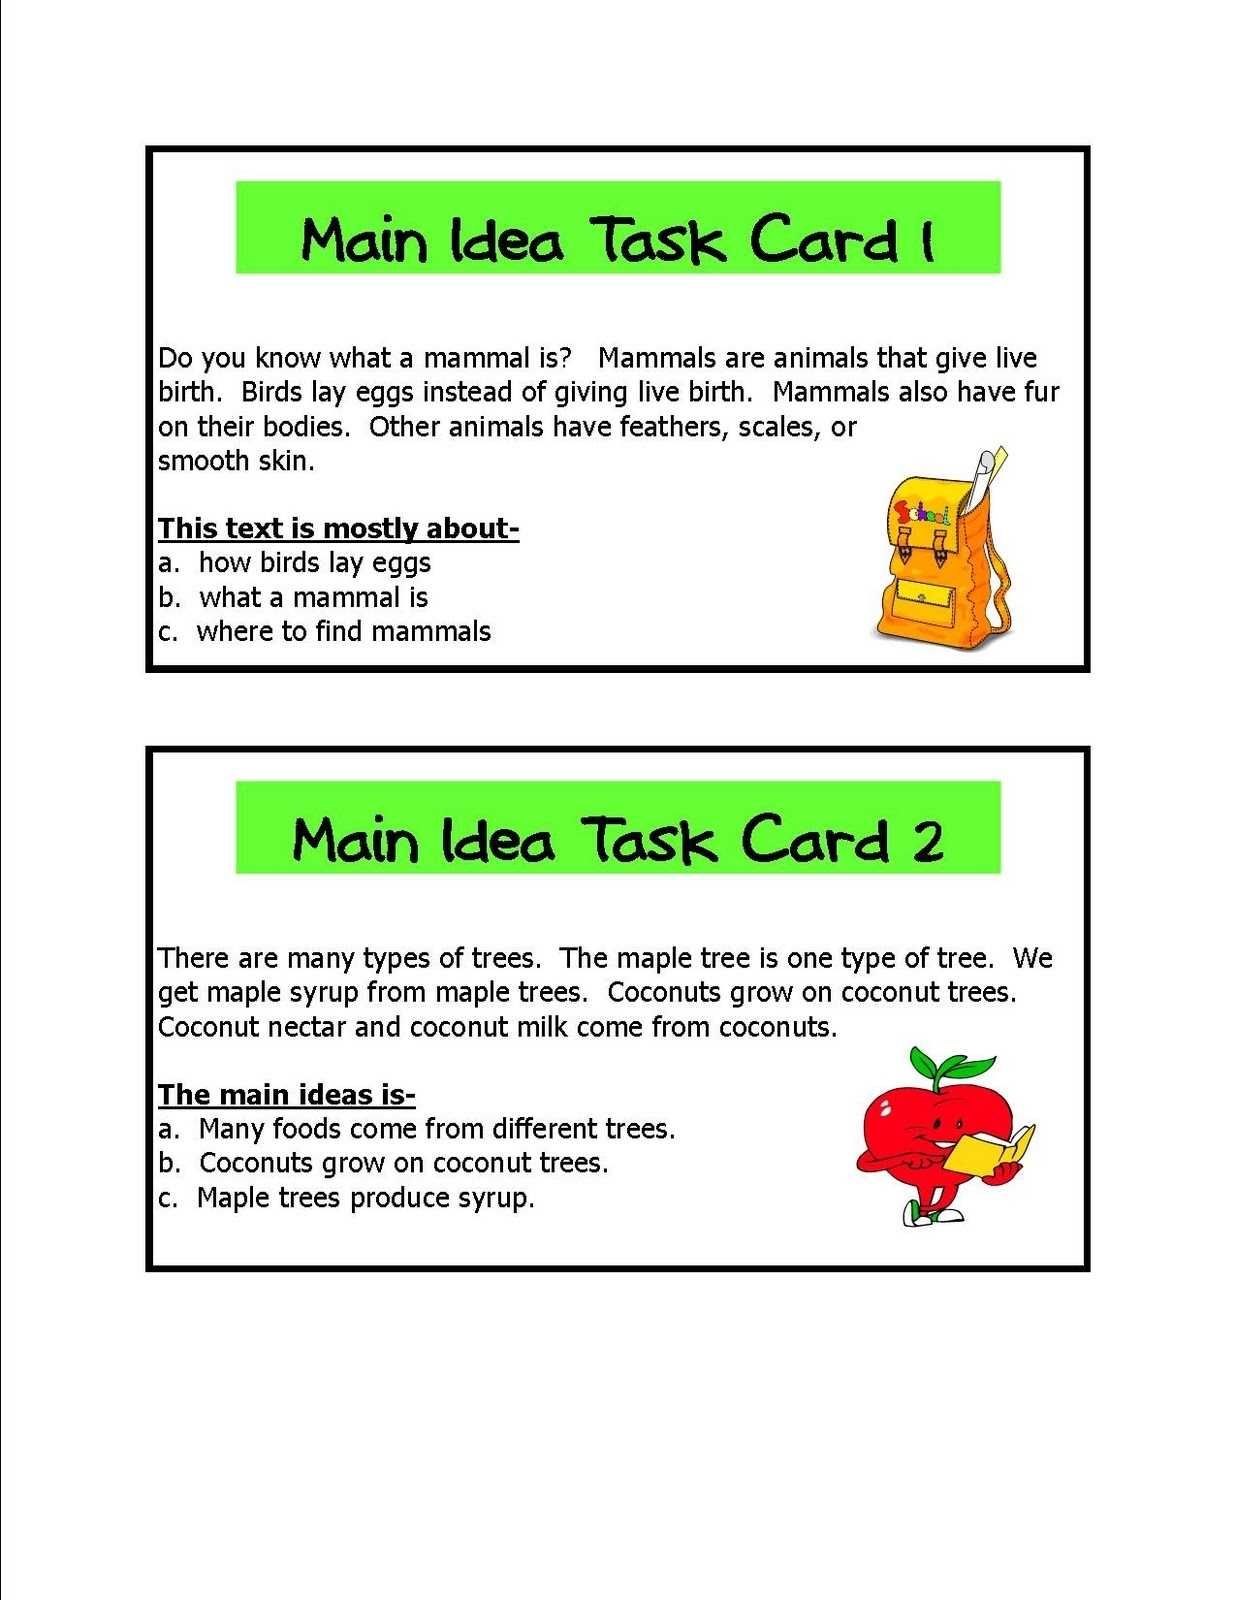 Compare and Contrast Worksheets 2nd Grade or Main Idea Worksheets 2nd Grade Image Collections Worksheet for